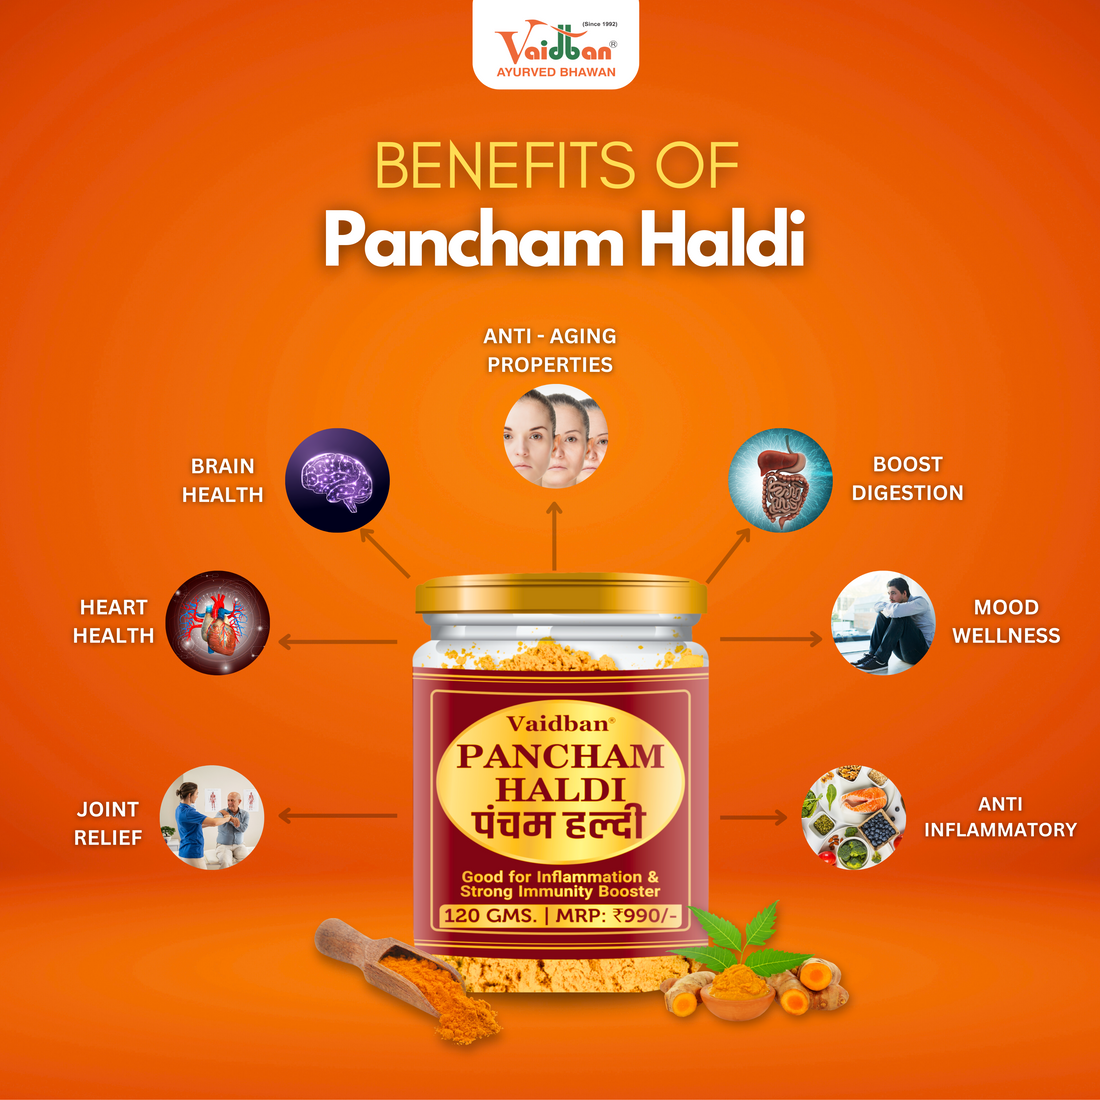 Pancham Haldi - Good for inflammation & Strong immunity booster.